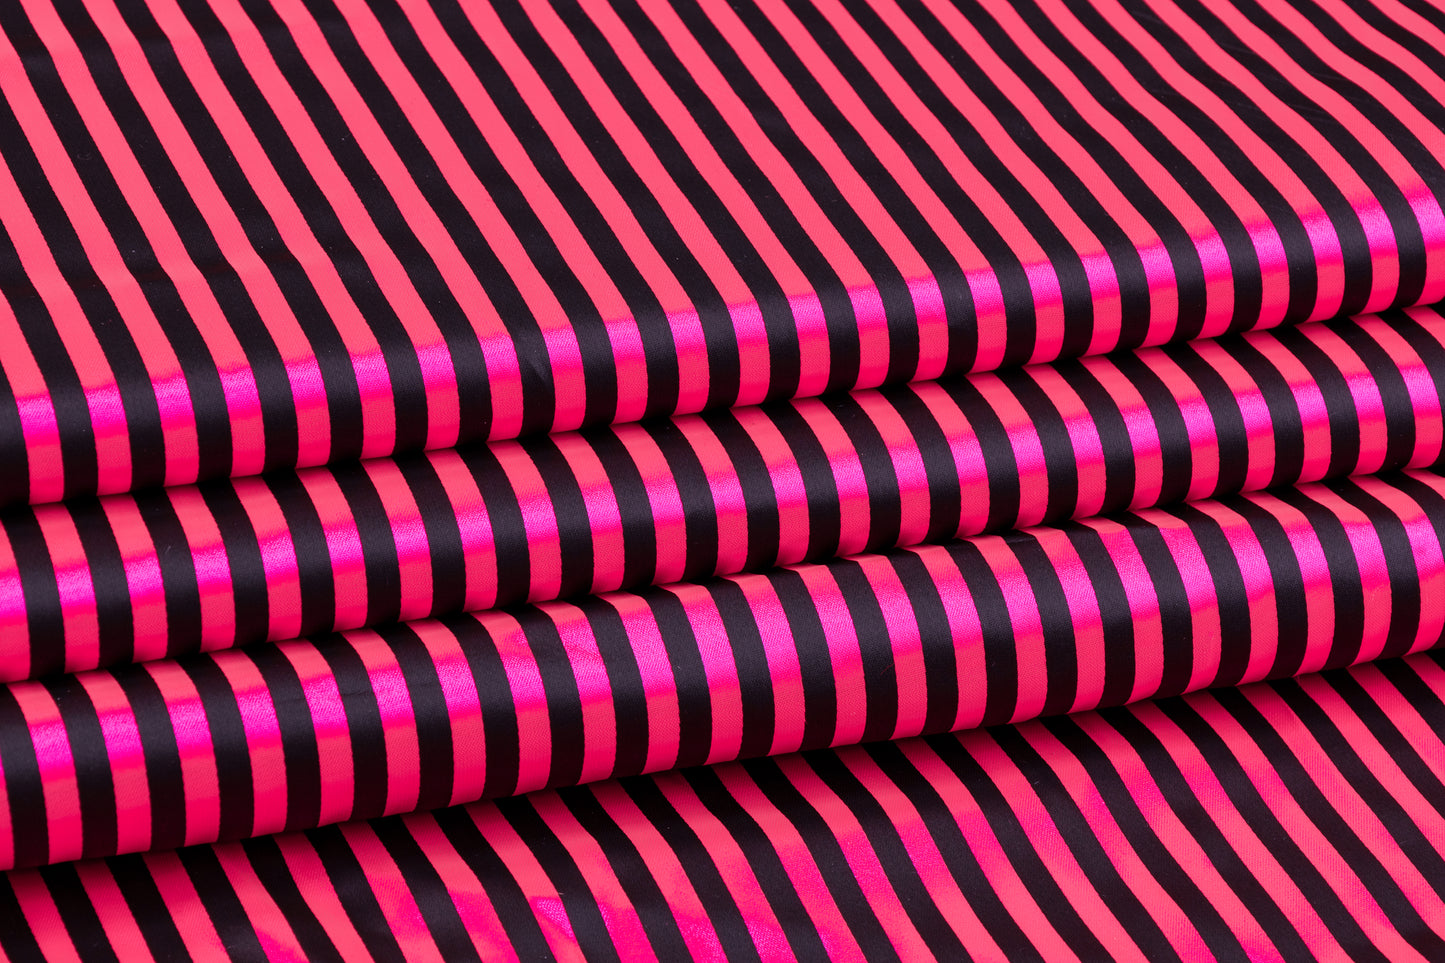 Striped Poly Acetate Satin - Pink and Black